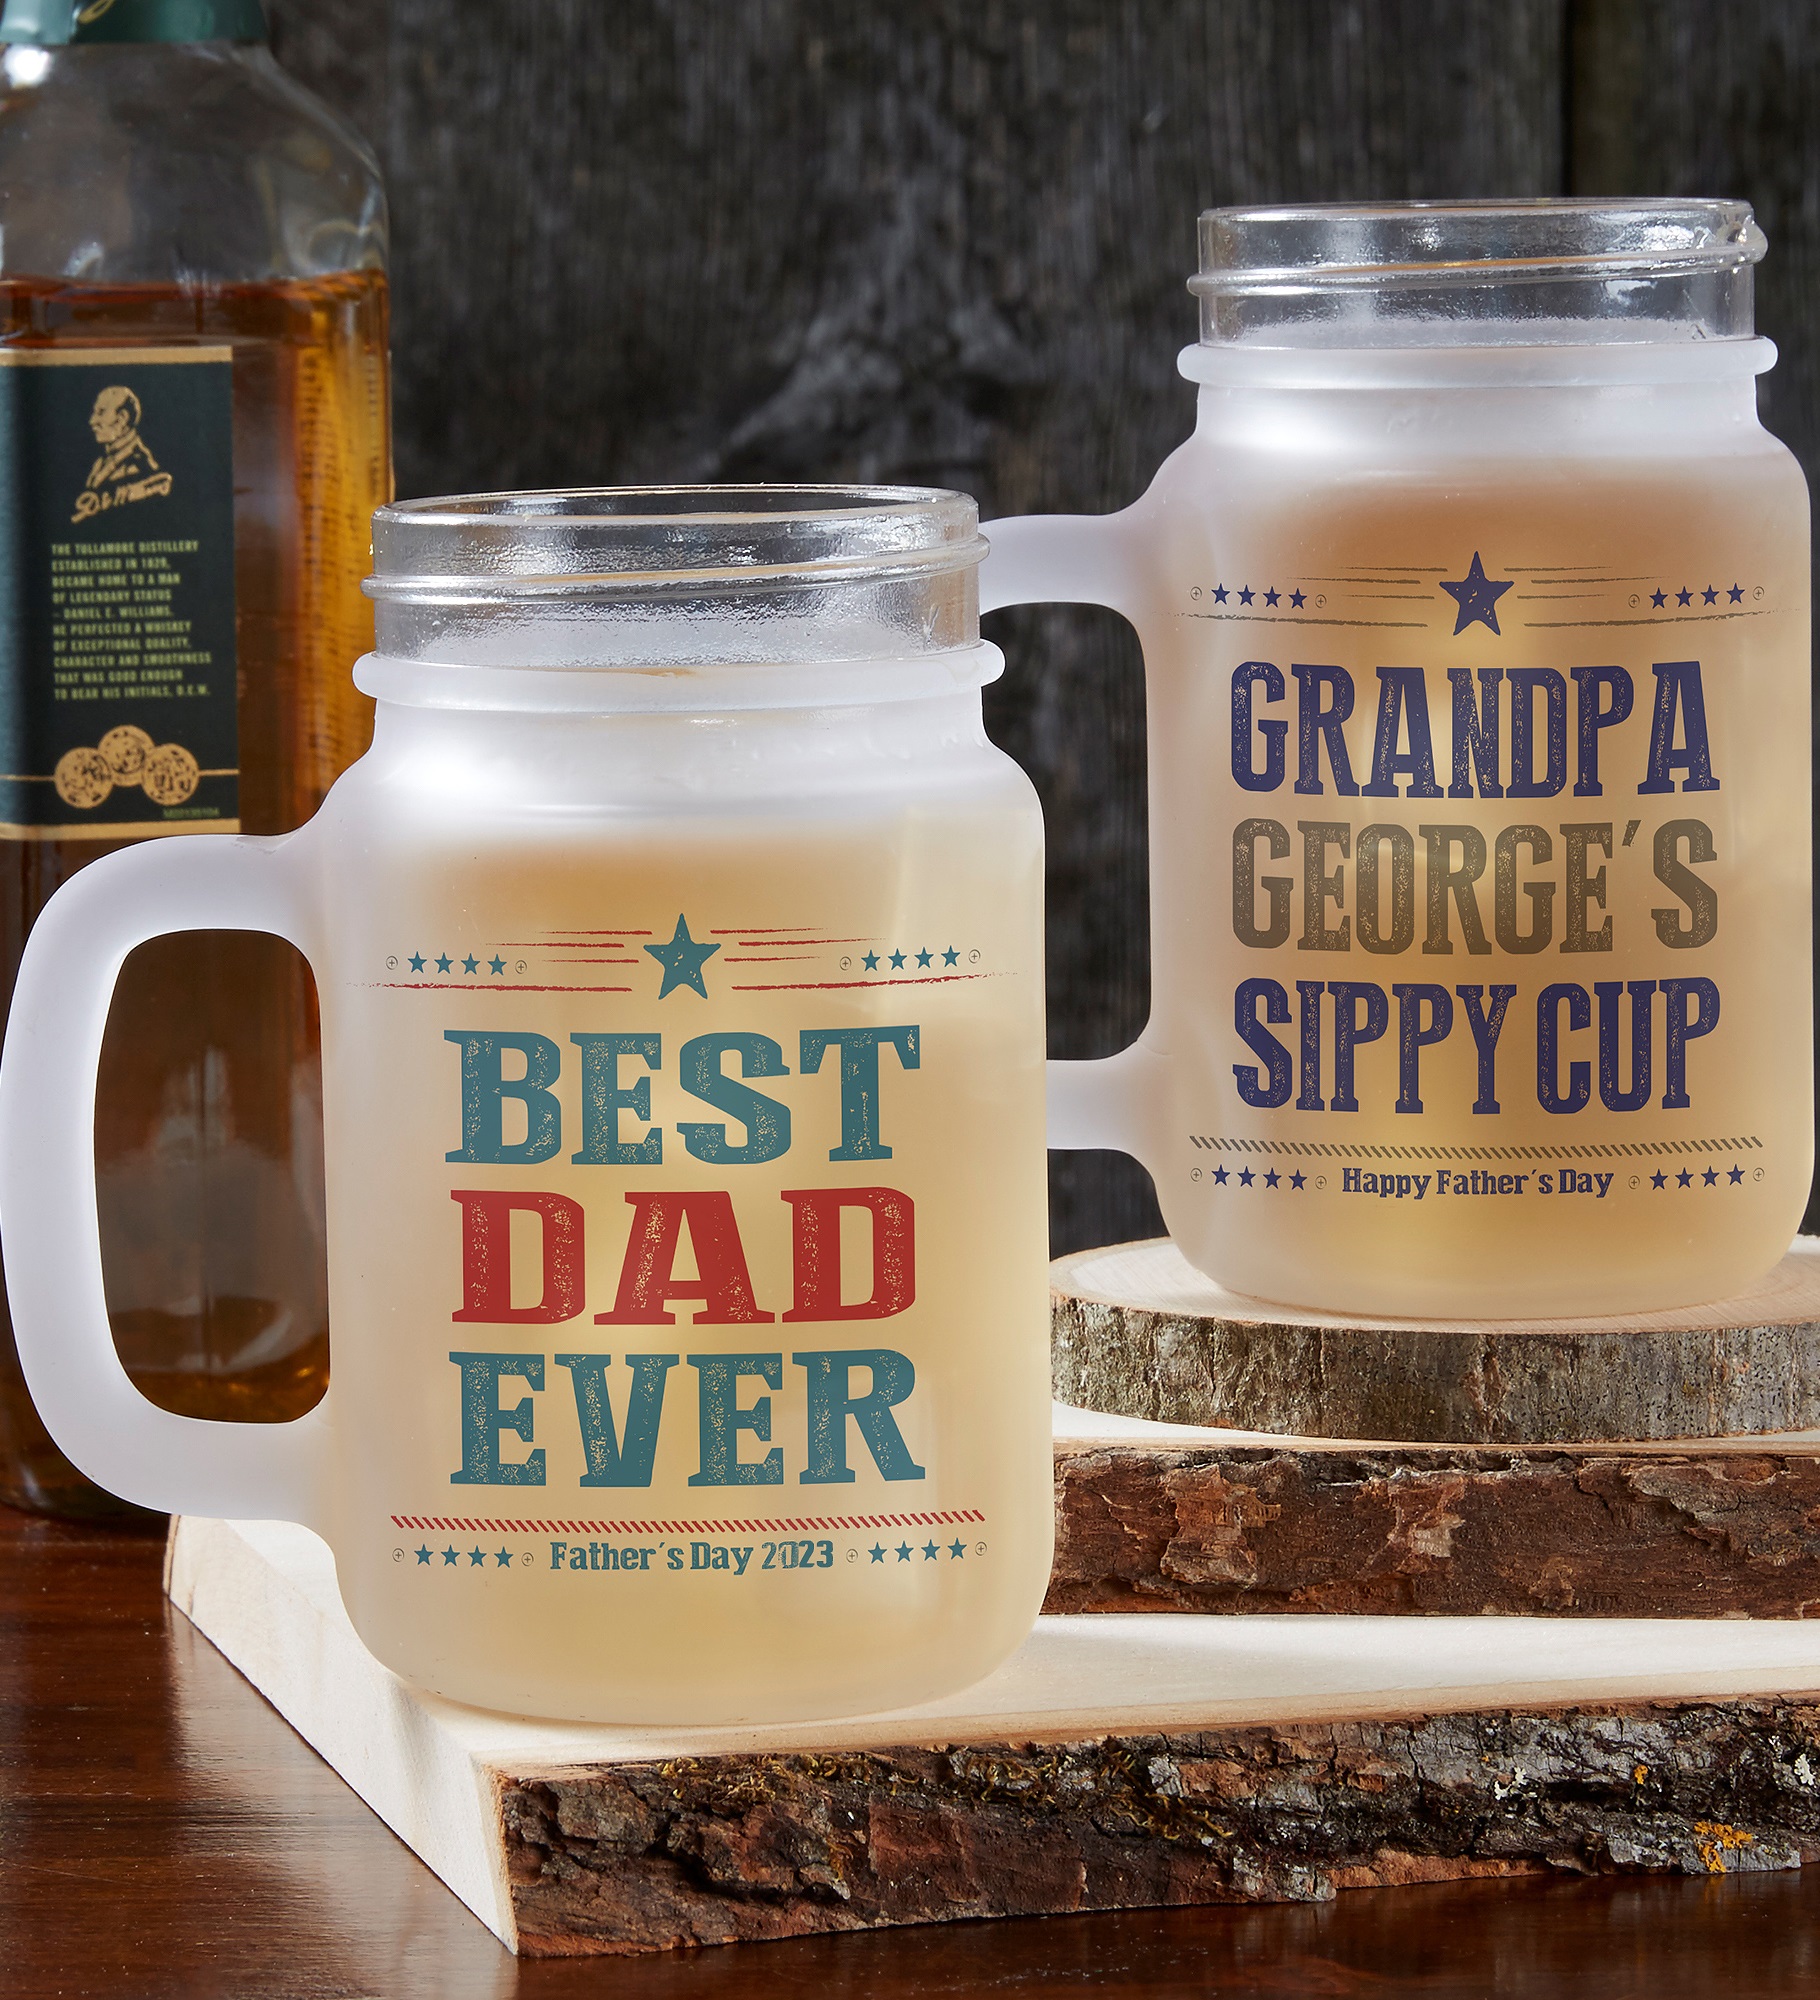 Write Your Own For Him Personalized Frosted Mason Jar